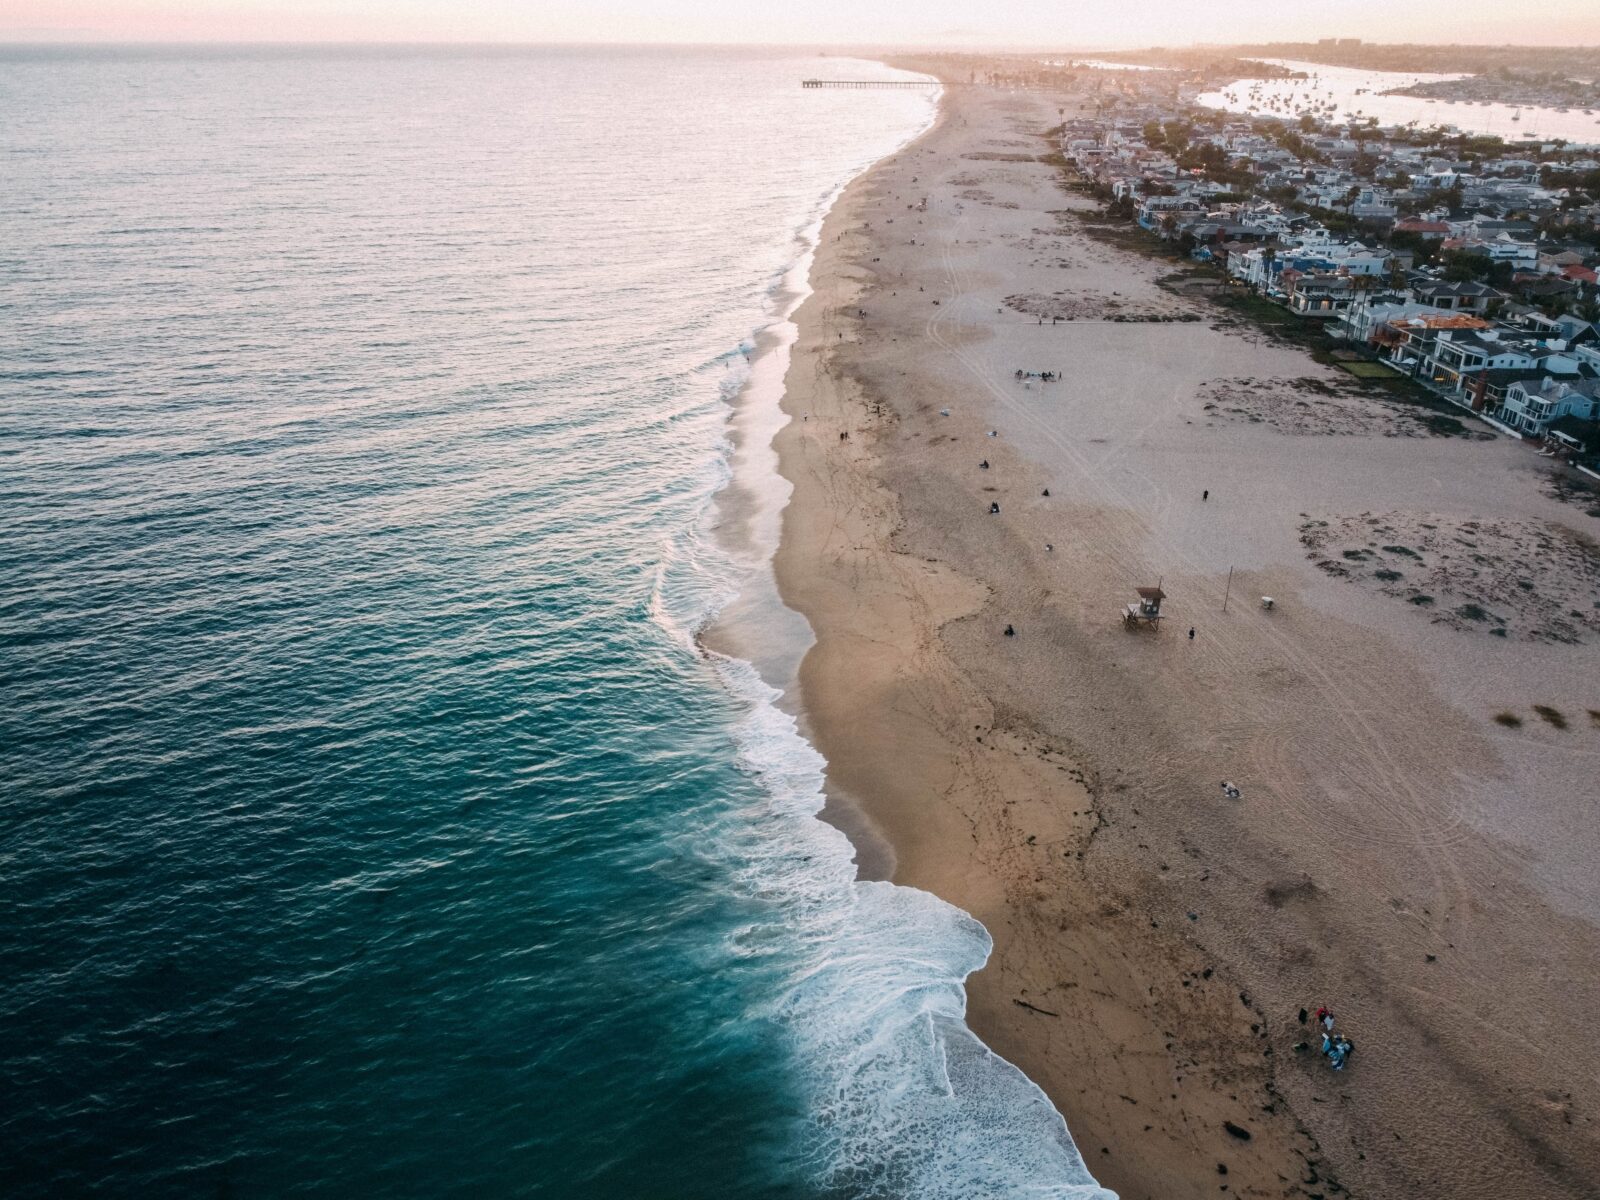 The city of Corona del Mar and the beach photographed from above